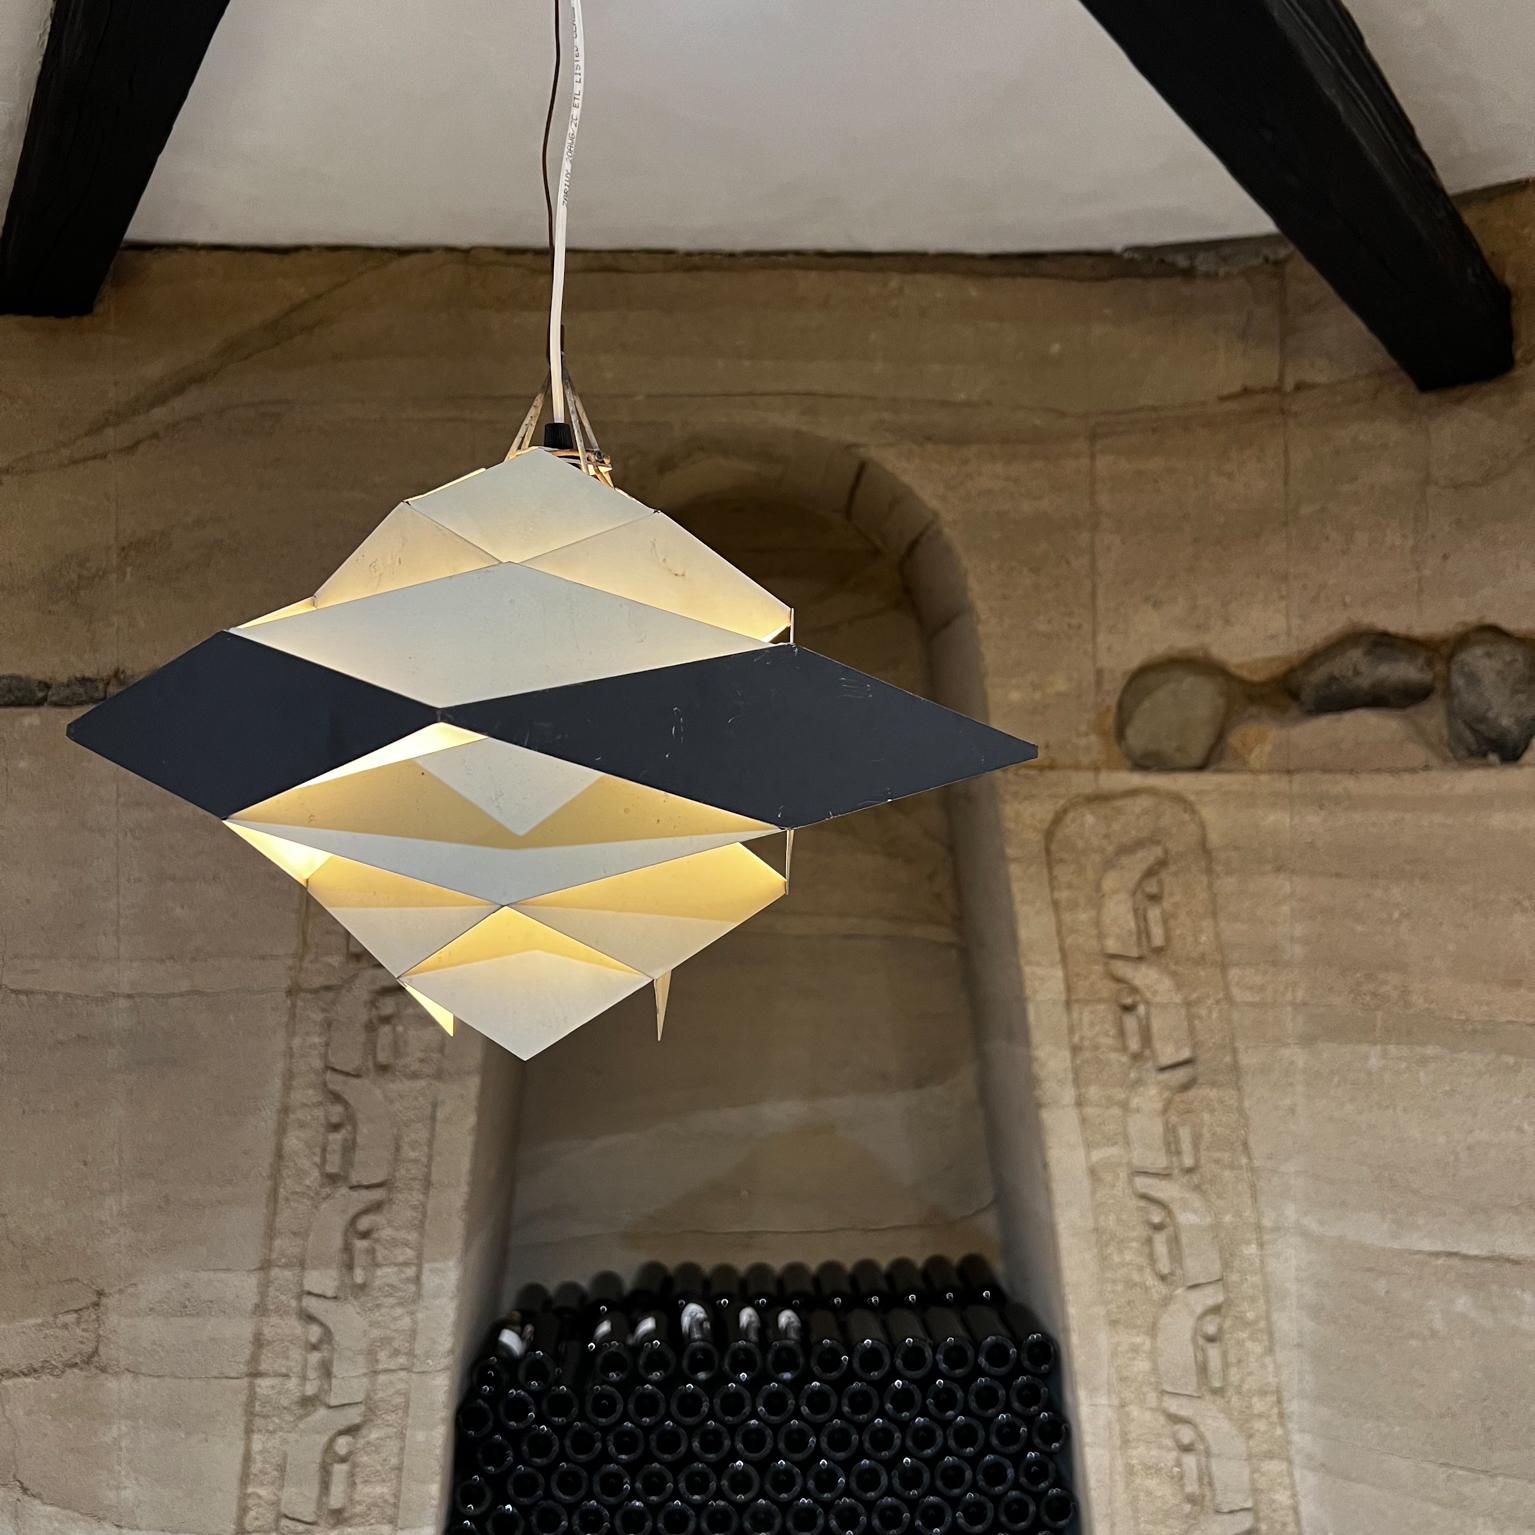 1960s Fabulous Modernism Symphoni Pendant Light designed by Preben Dal (Dahl) for Hans Følsgaard AS Denmark.
Spectacular geometric hanging pendant has rings of rhomboid facets that deflect and distribute the light within.
Designed in lacquered